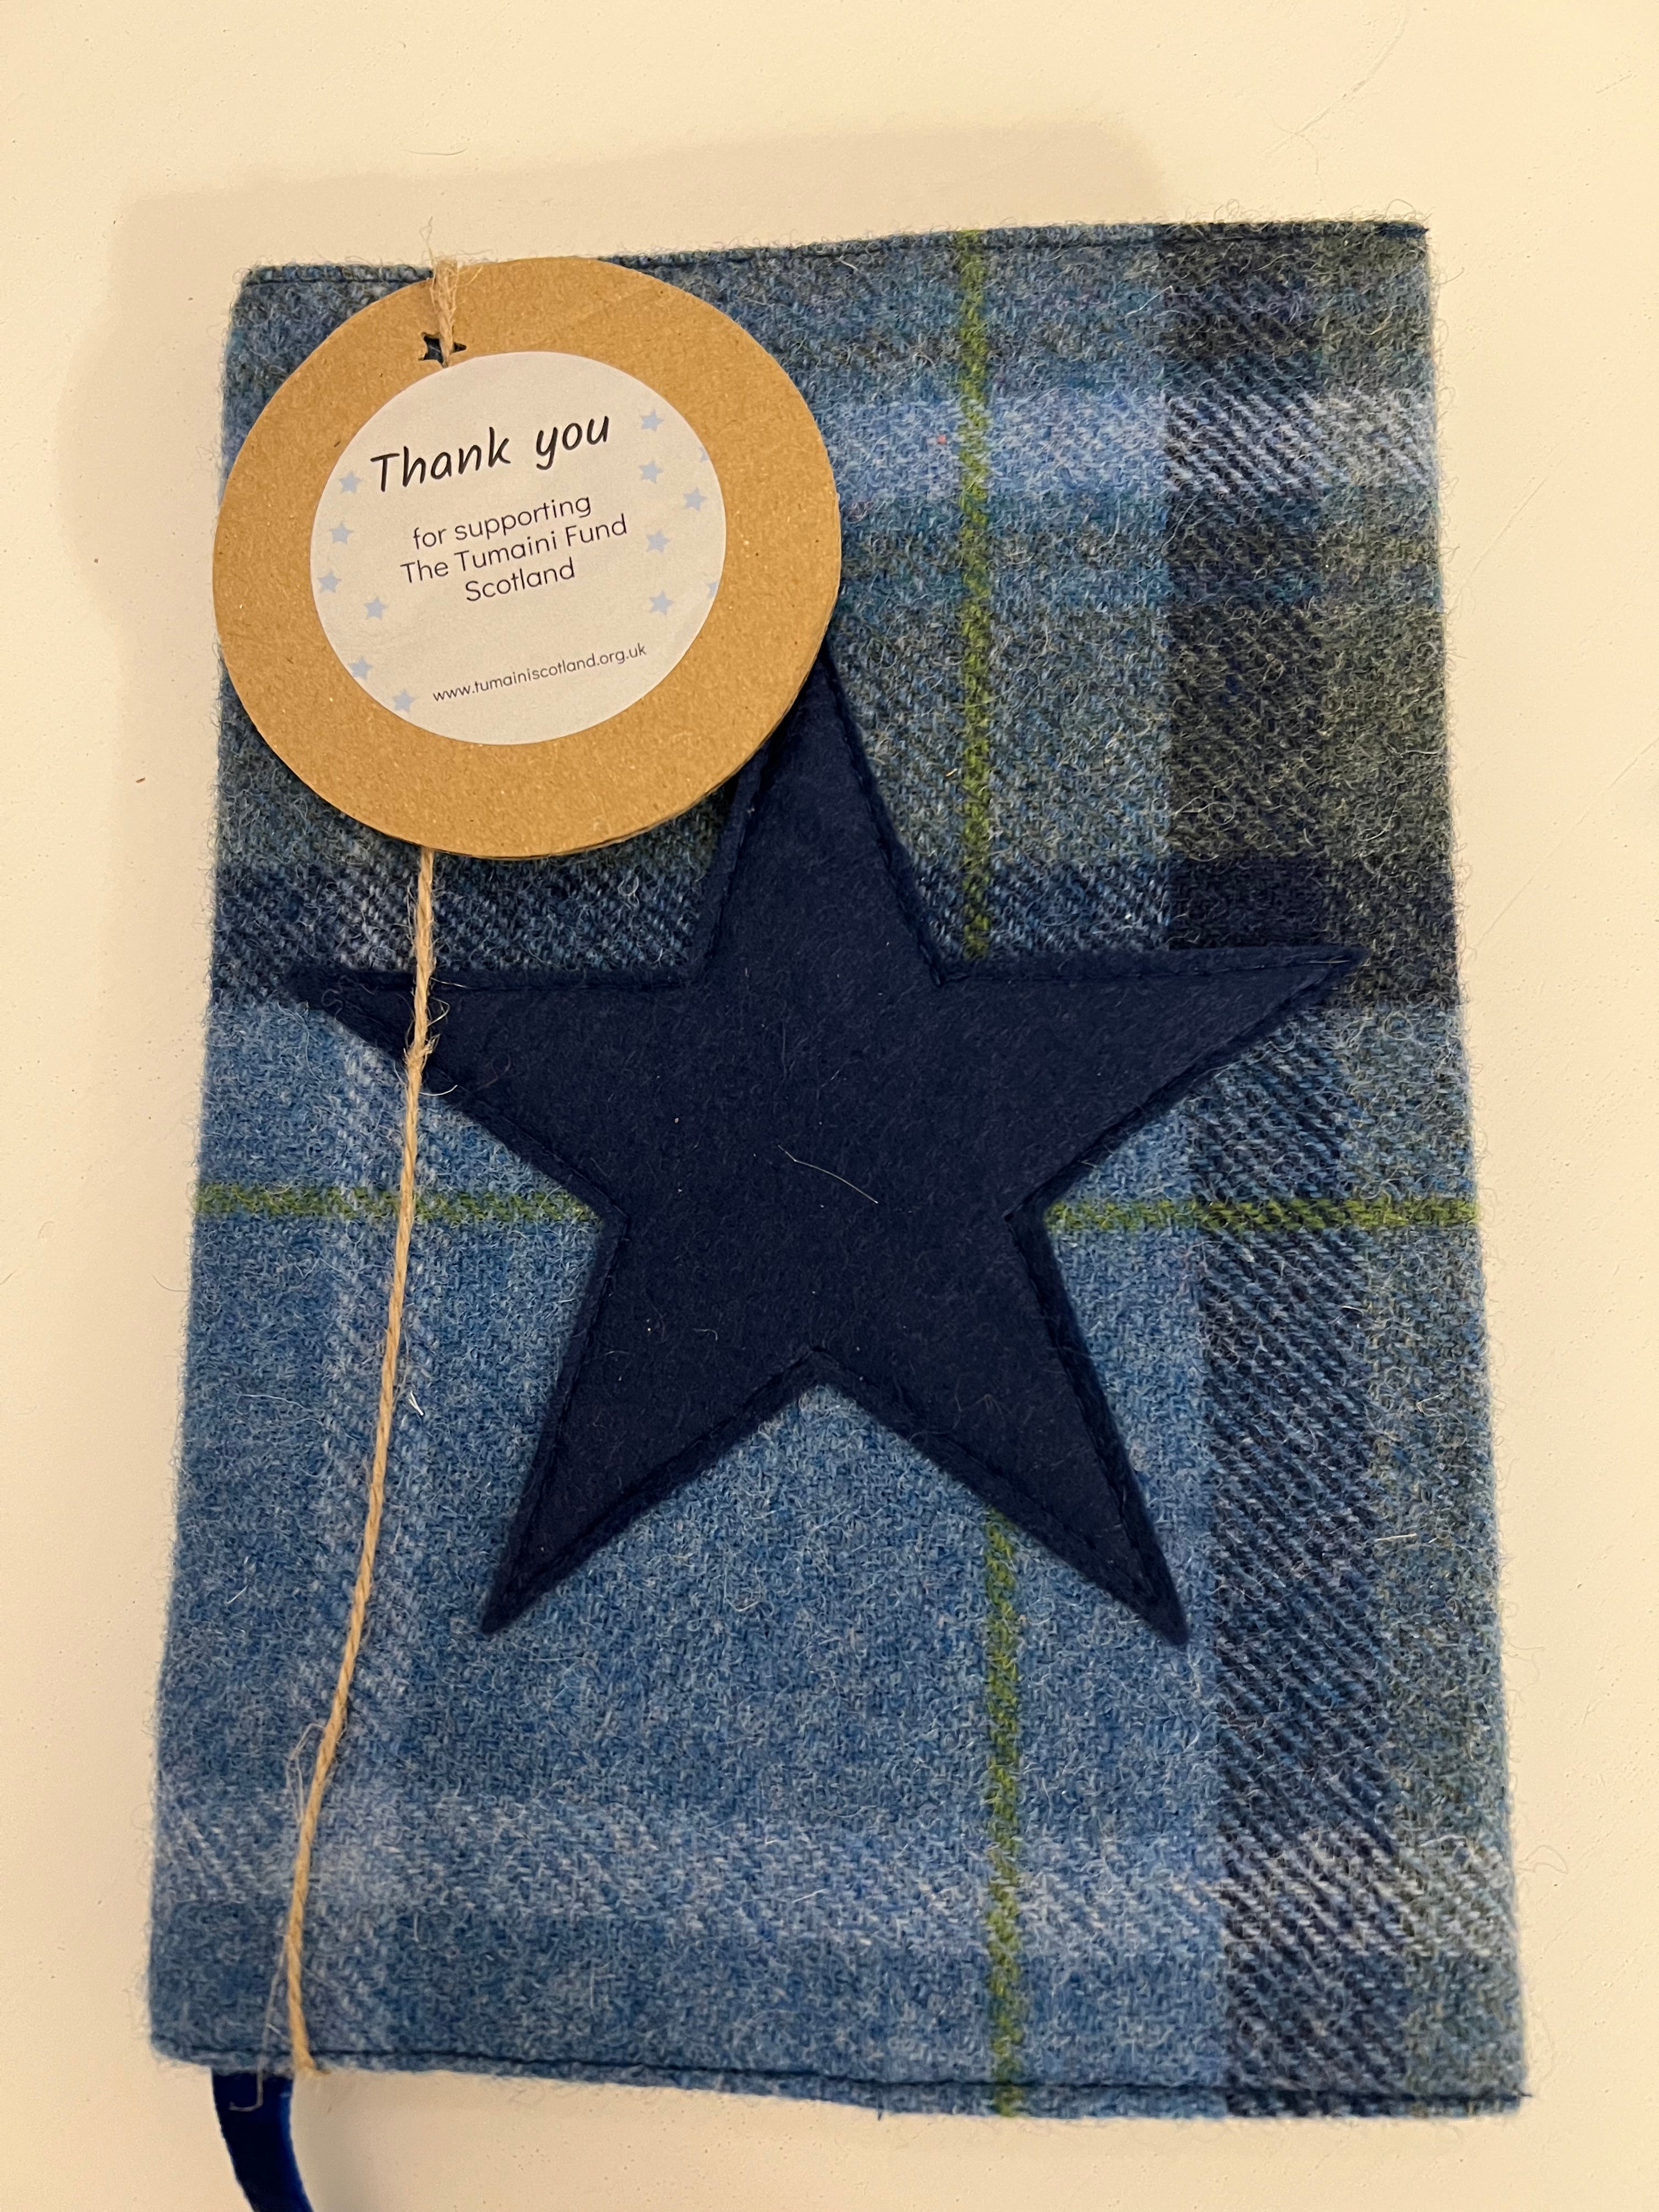 Tartan style Tweed Notepad (in support of Tumani Fund (Scotland) charity)